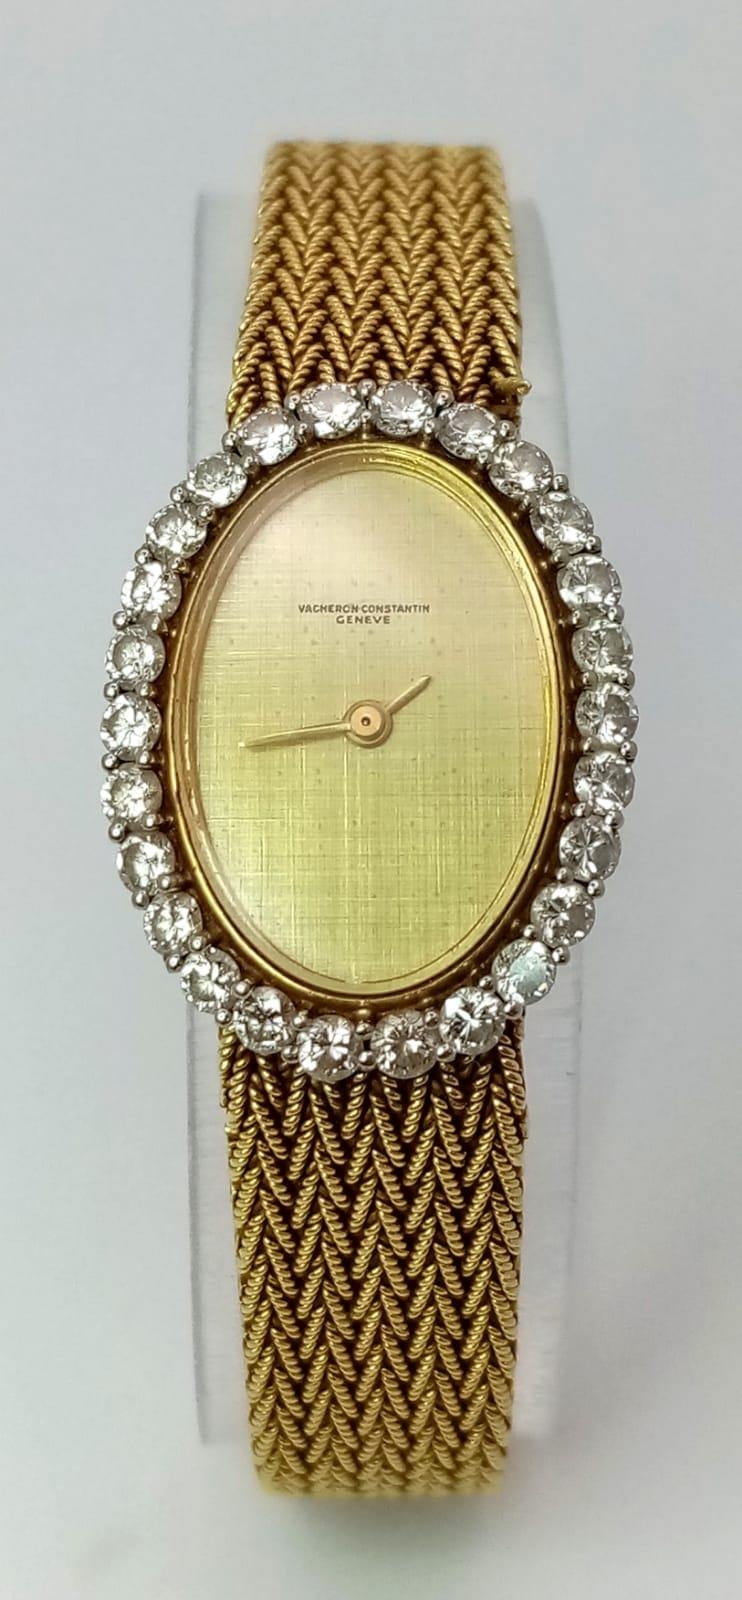 A Vacheron-Constantin 18K Yellow Gold and Diamond Ladies Watch. Gold bracelet and oval case - - Image 2 of 9